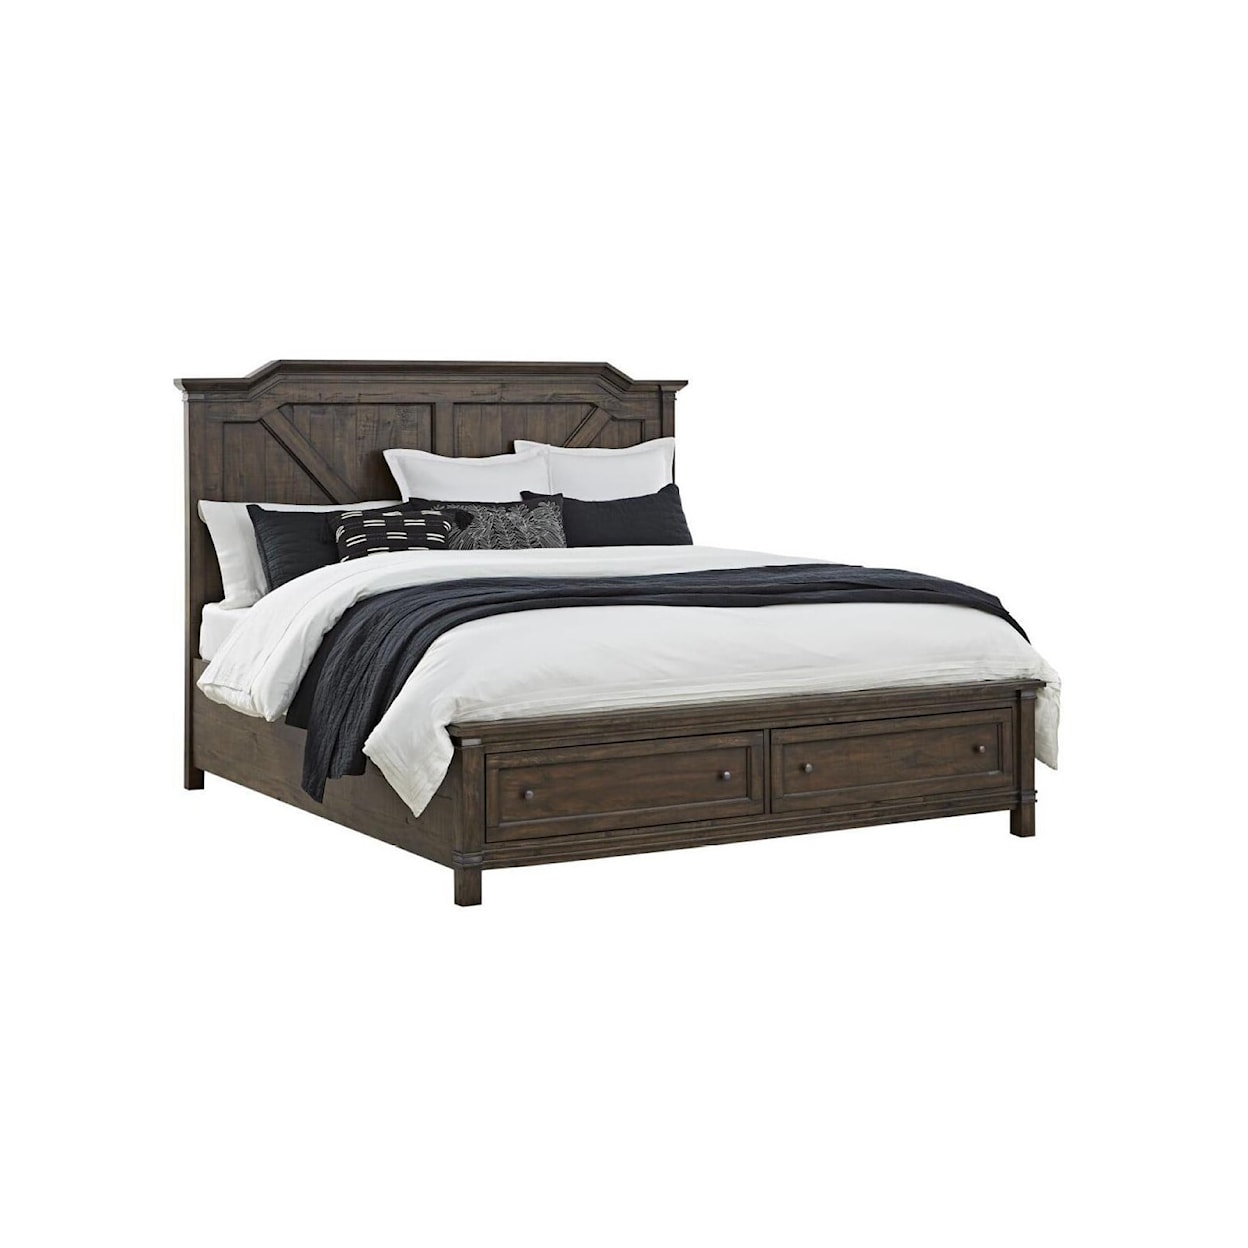 American Woodcrafters Farmwood King Storage Bed